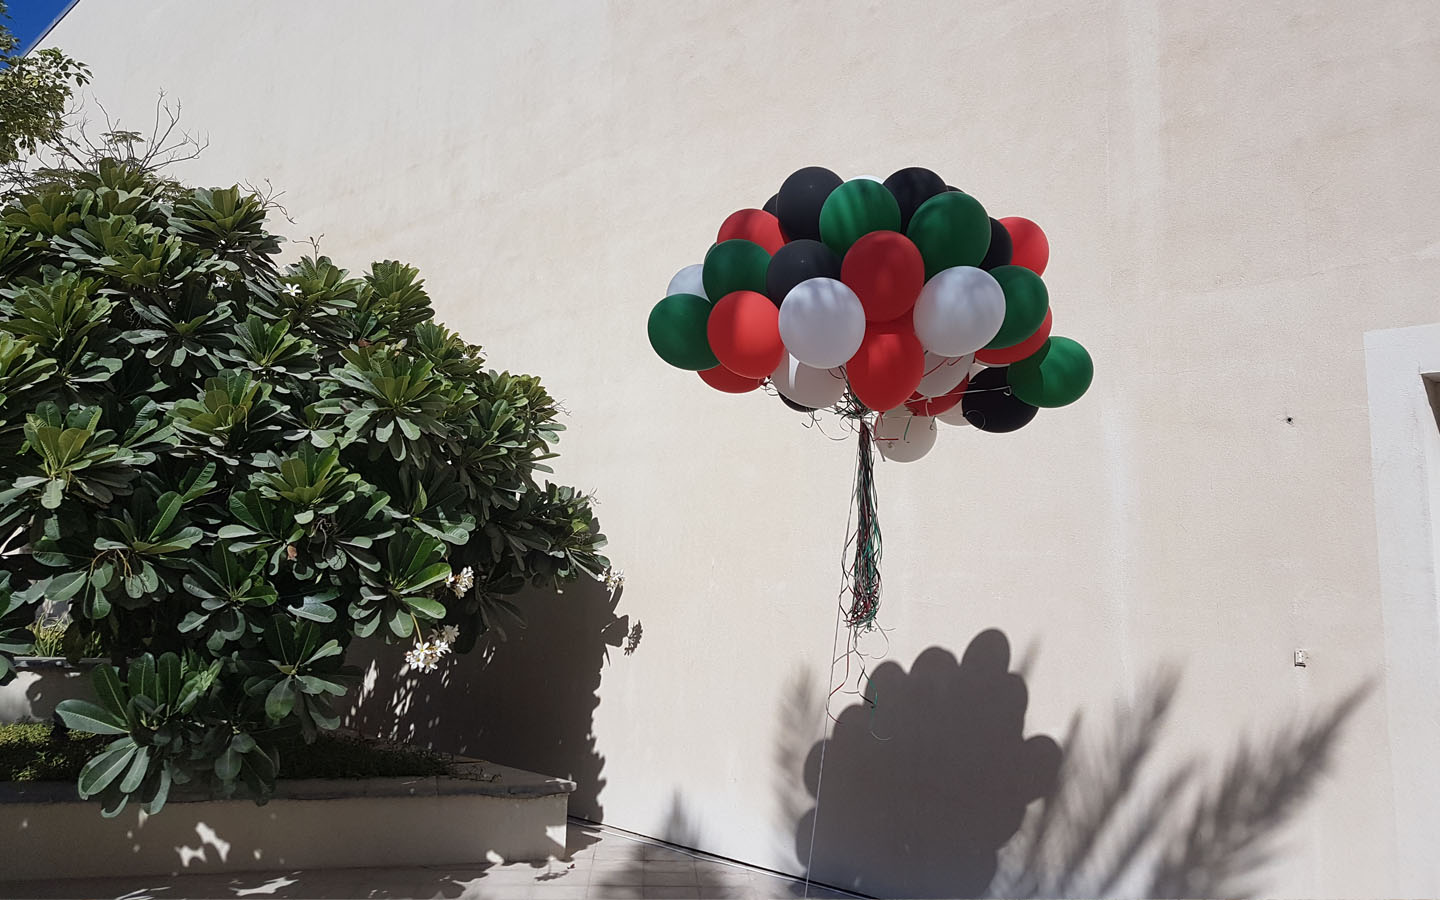 balloon decorations for UAE national day